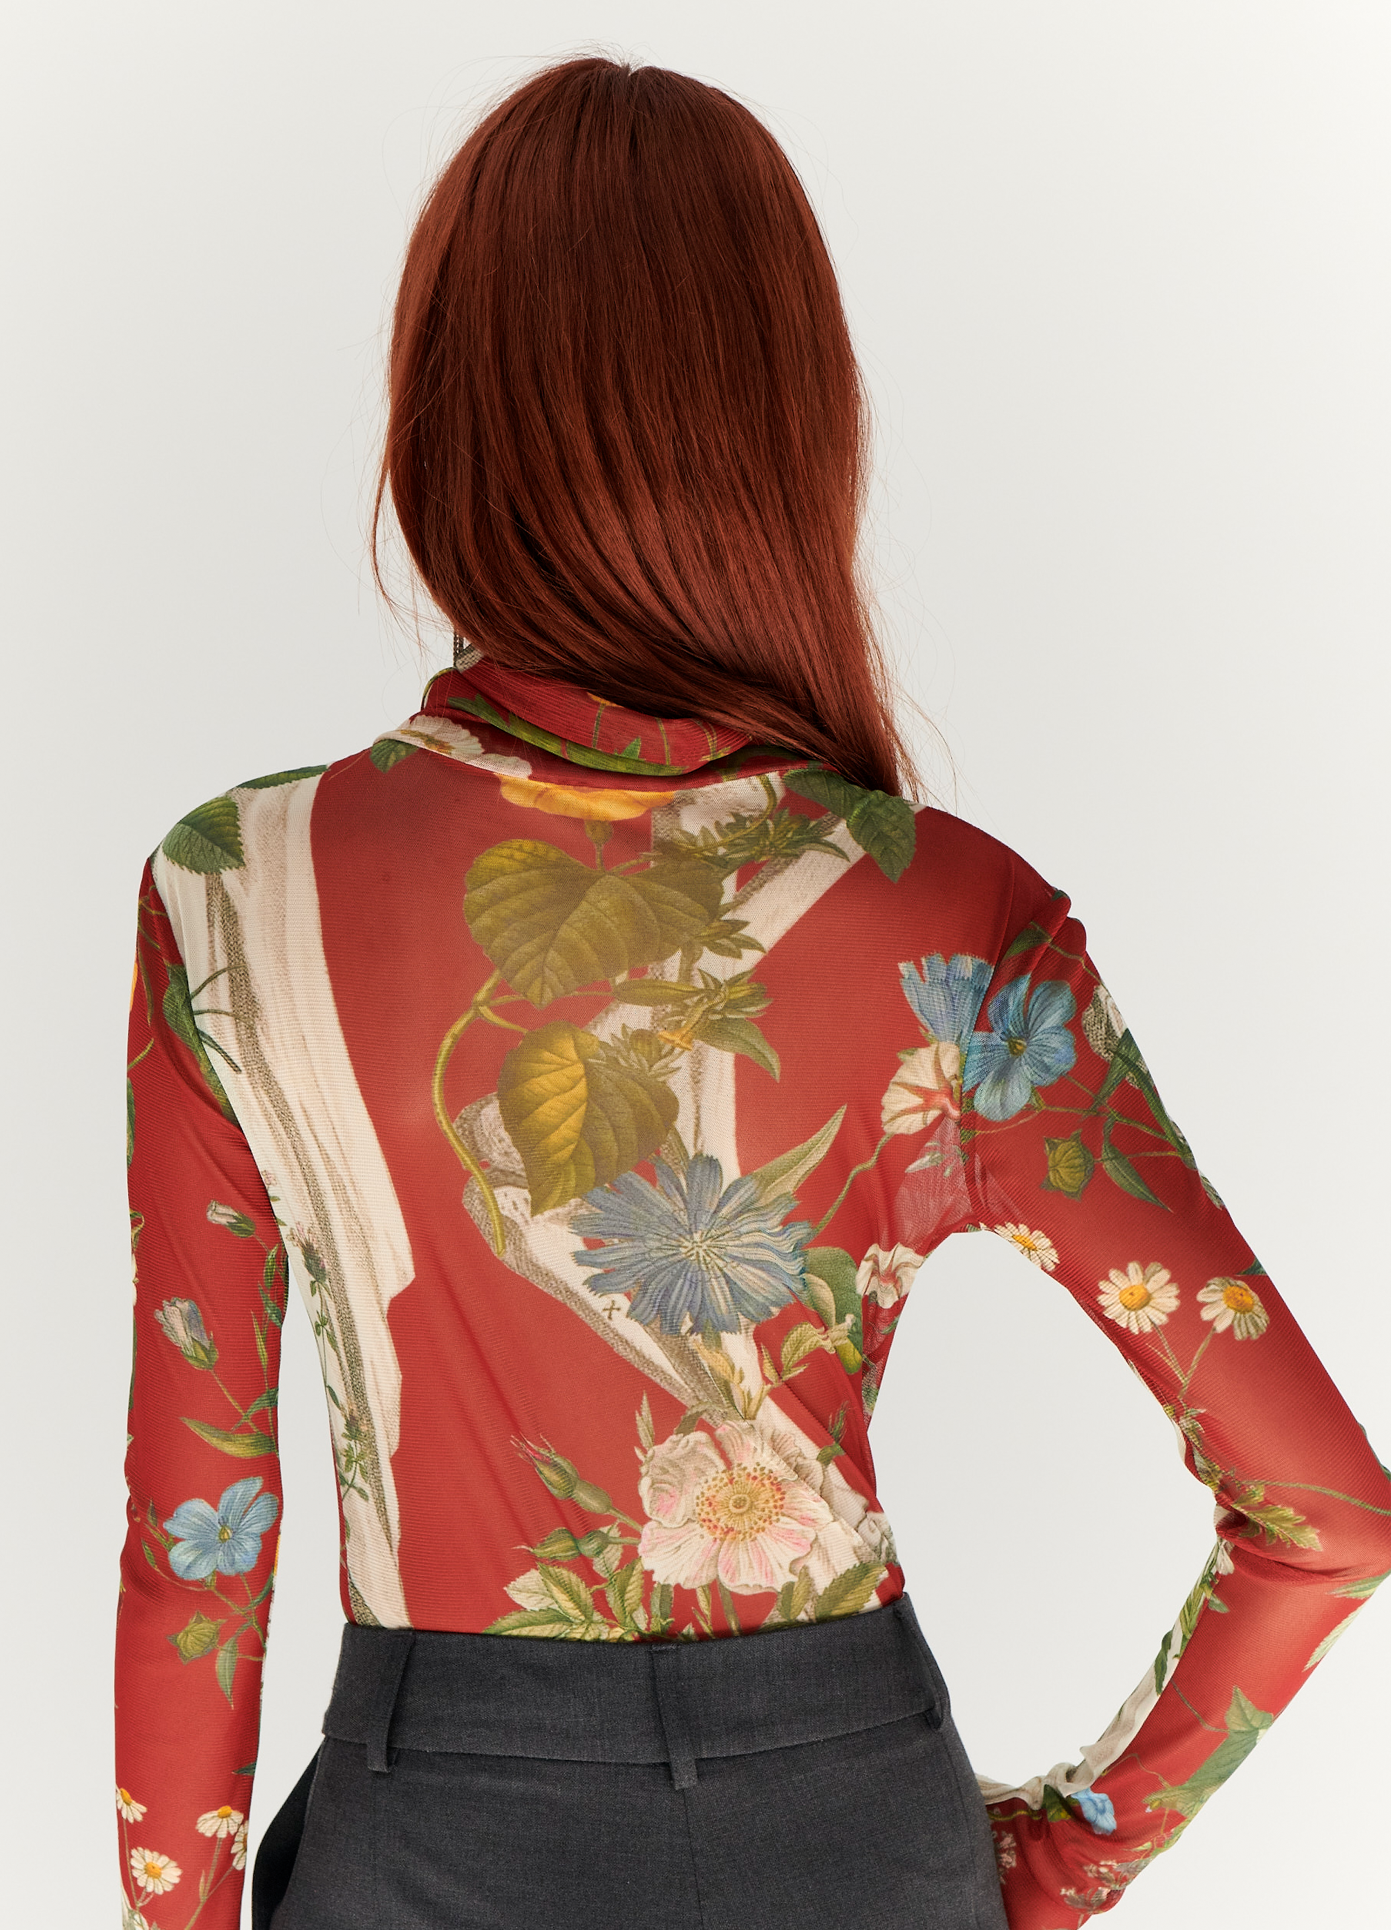 MONSE Floral Skeleton Print Mesh Turtleneck in Red Multi on model with hand in pocket back view